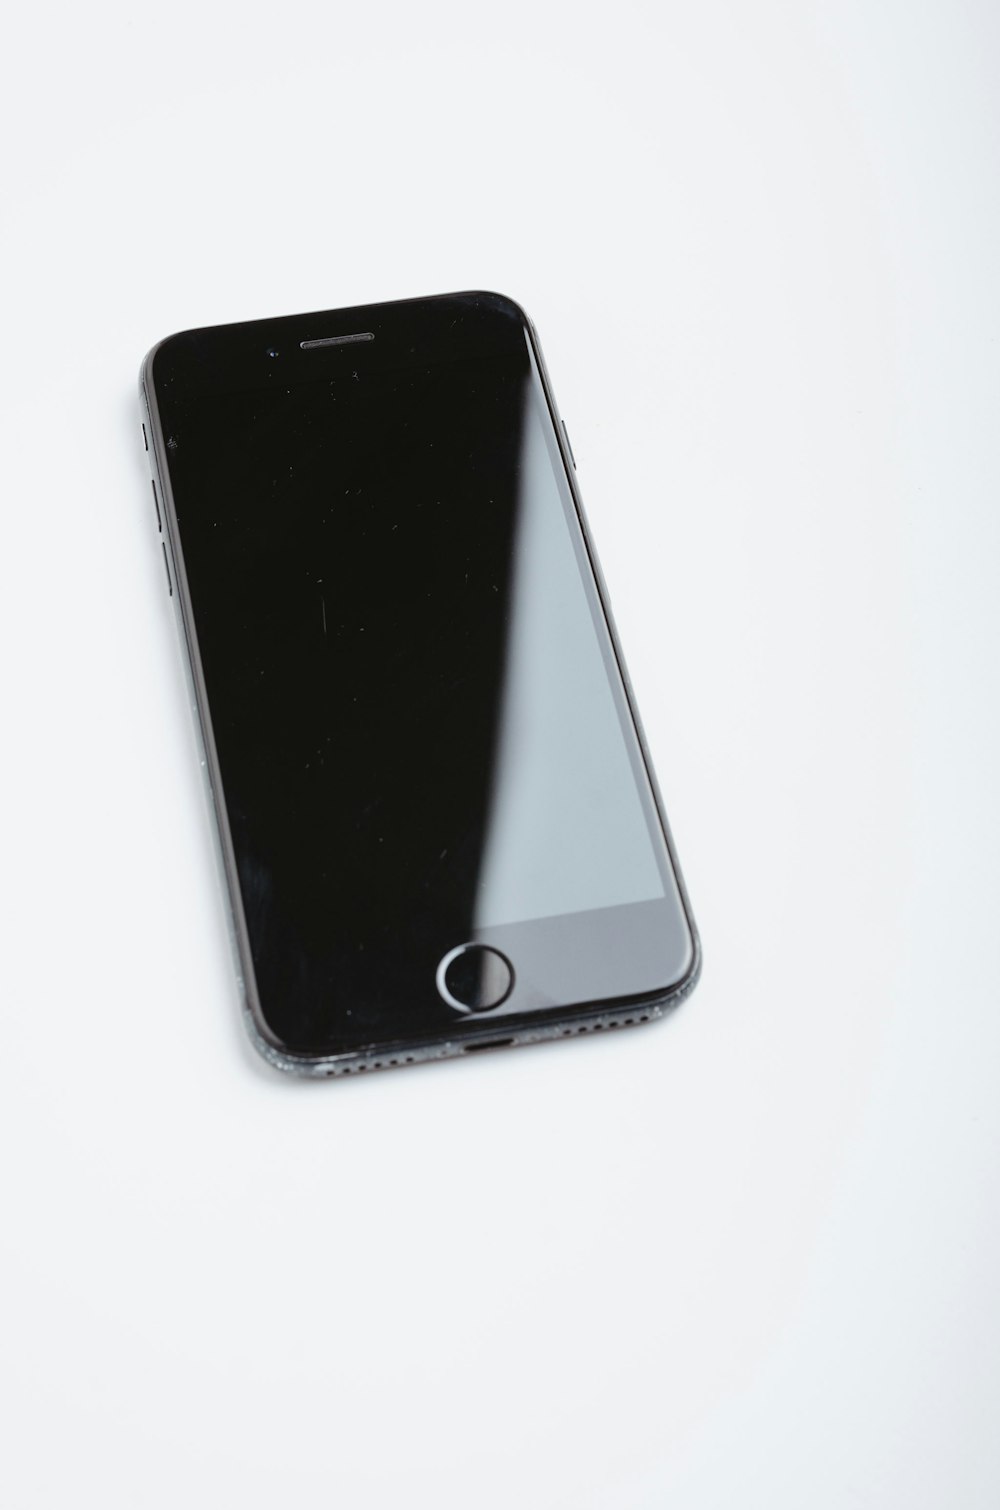 space gray iphone 6 on white surface